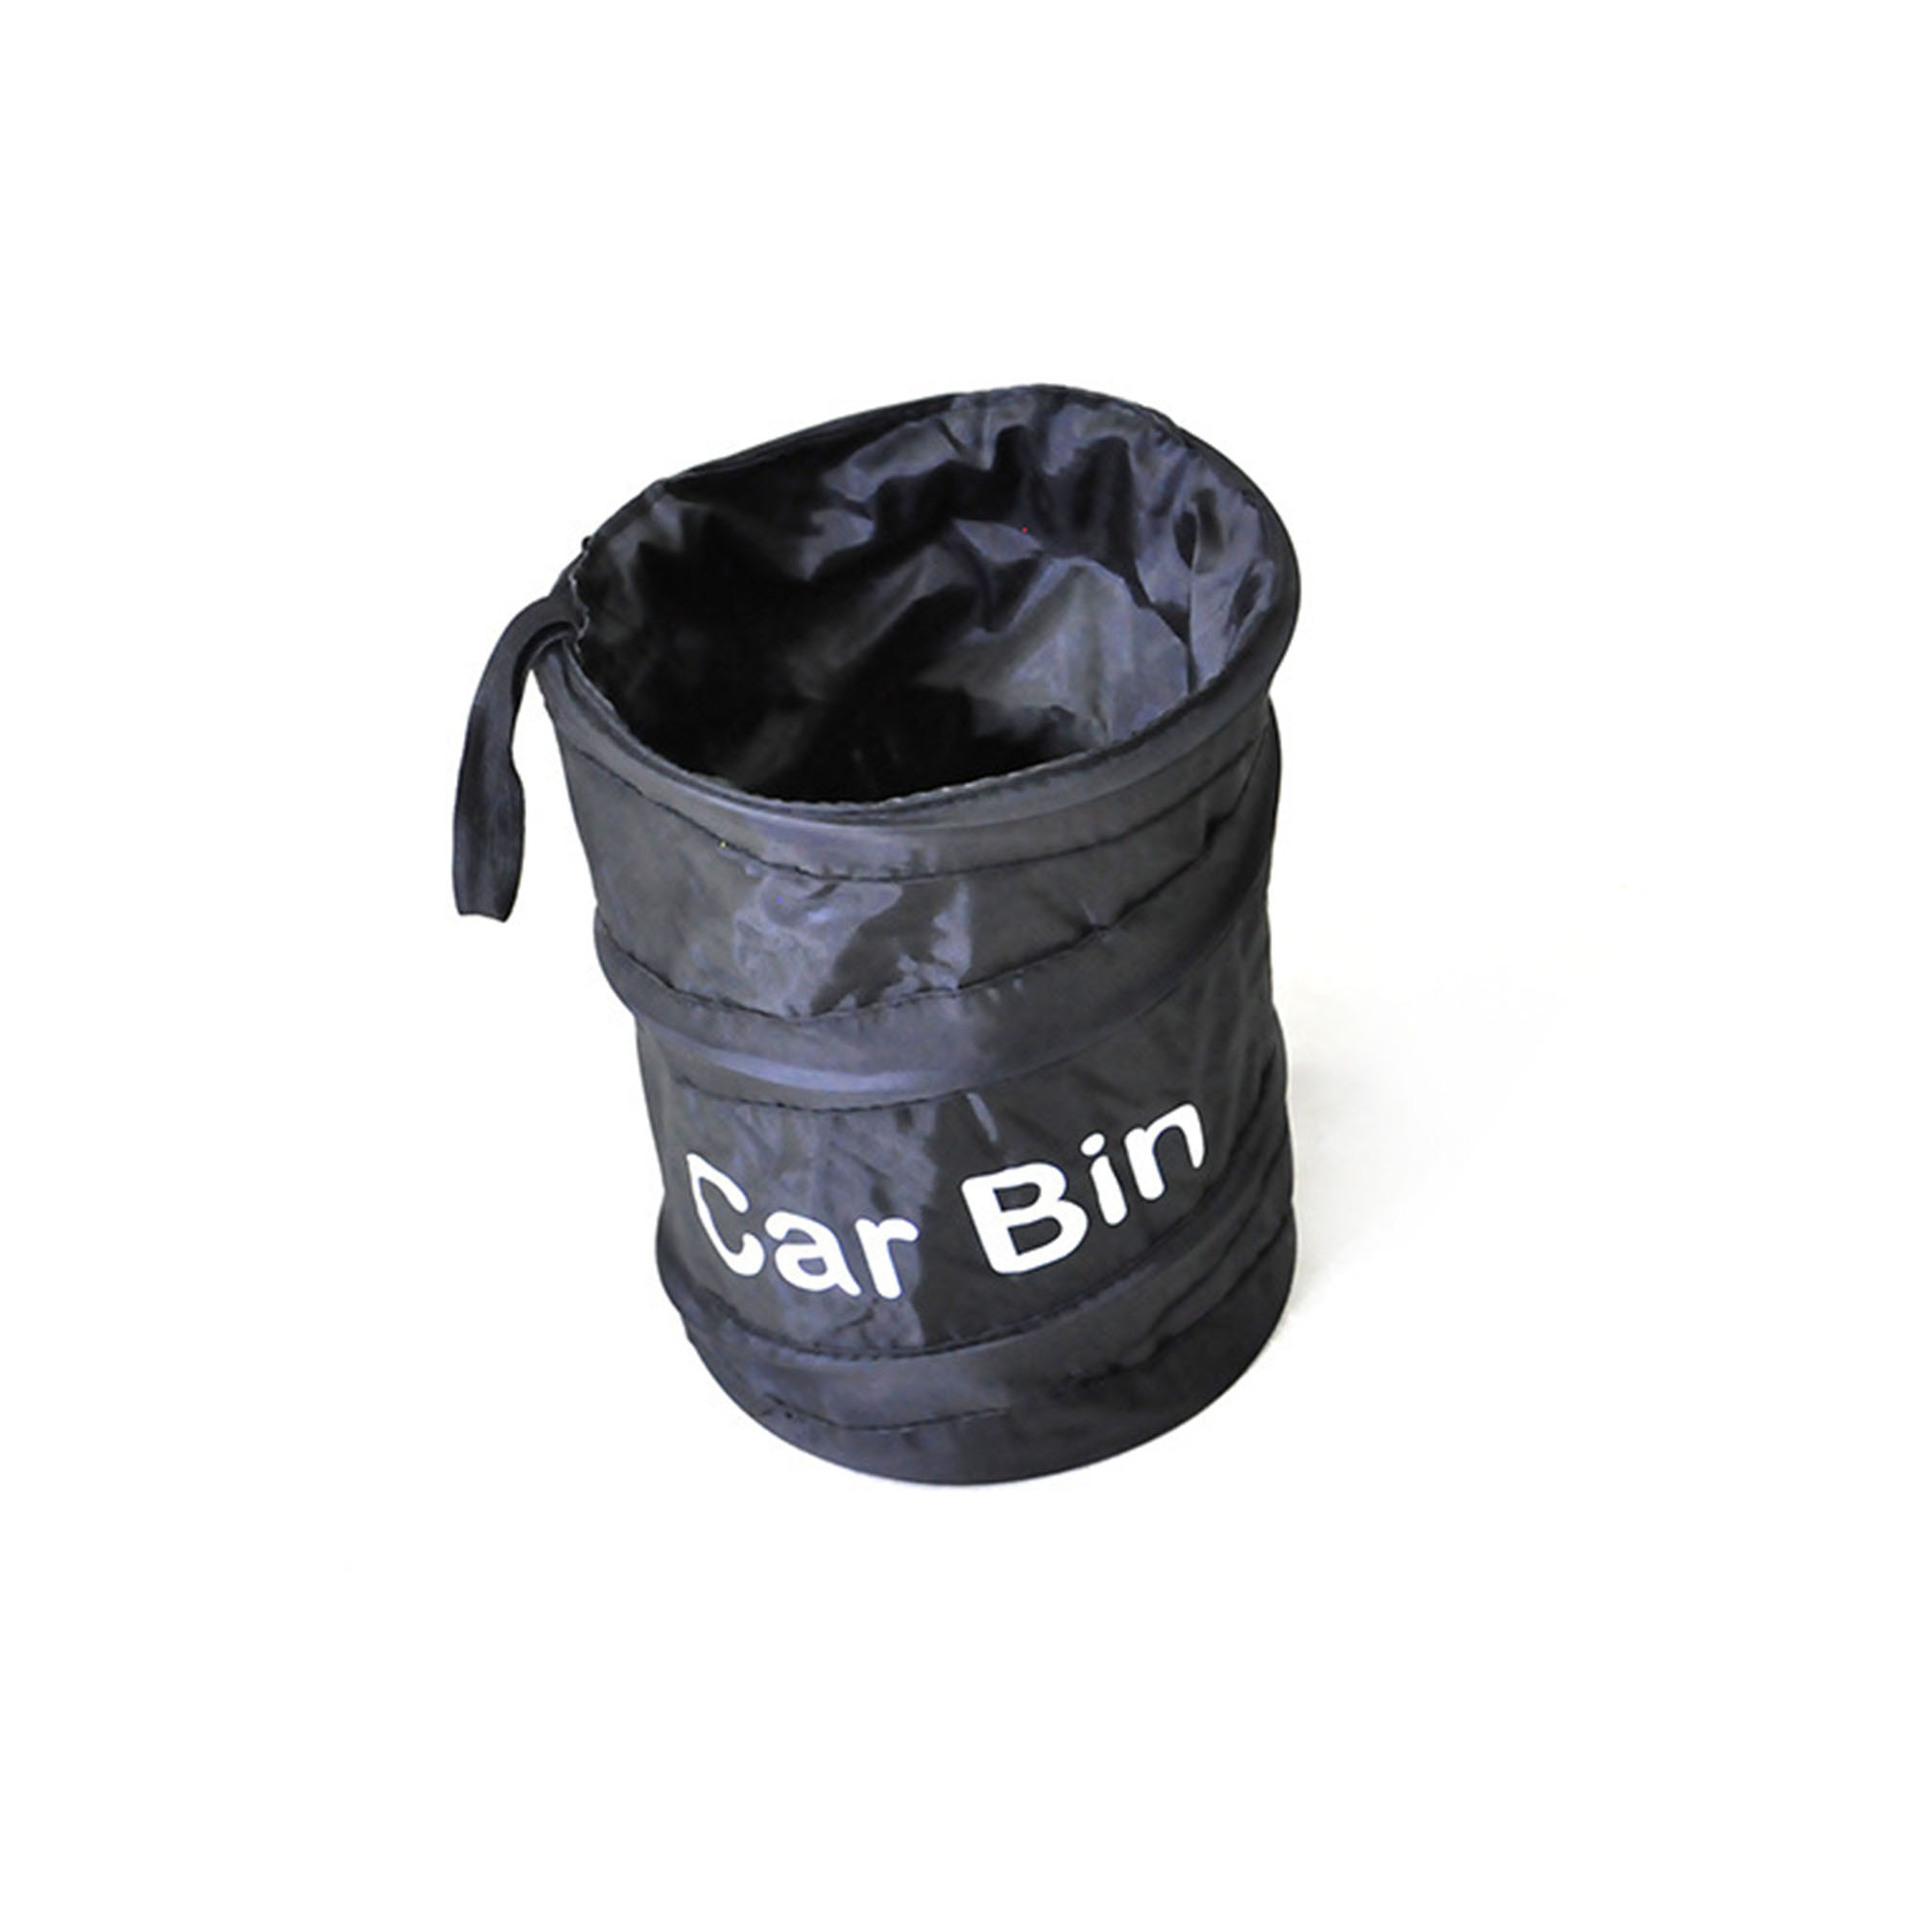 Keep Your Car Clean & Organized with this Collapsible Car Trash Can!